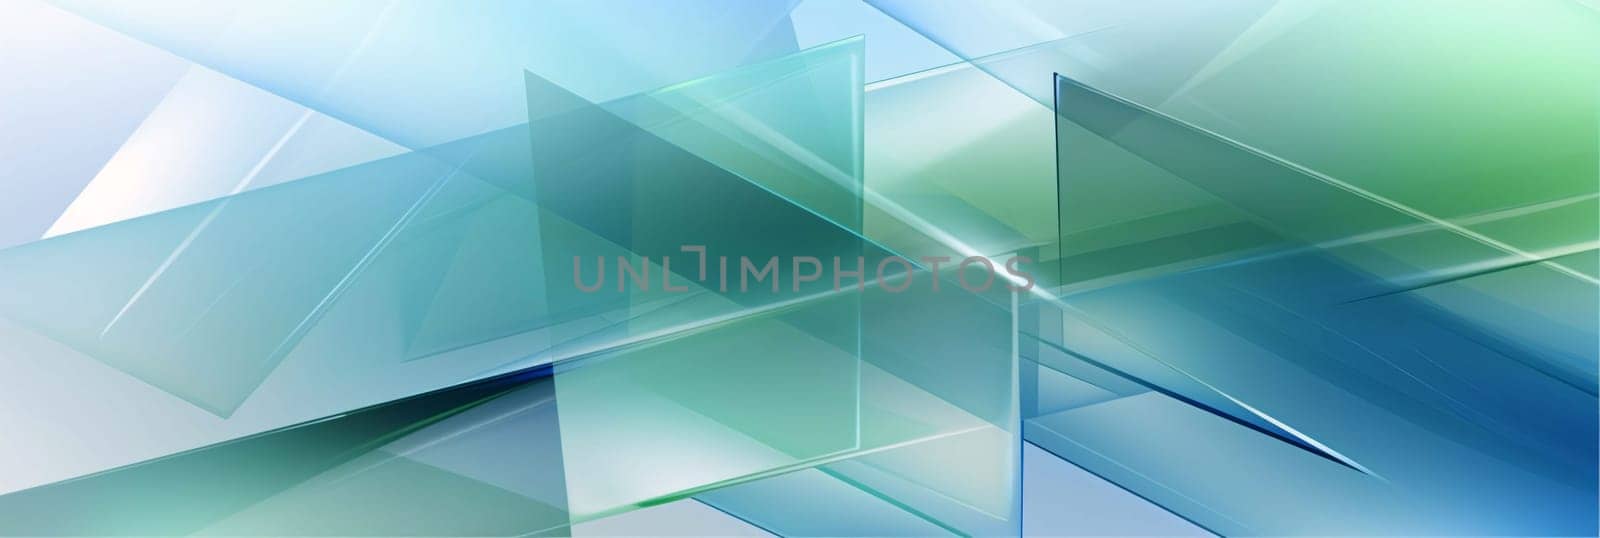 Triangle abstract background design. Vector graphic illustration. Banner template. by ThemesS